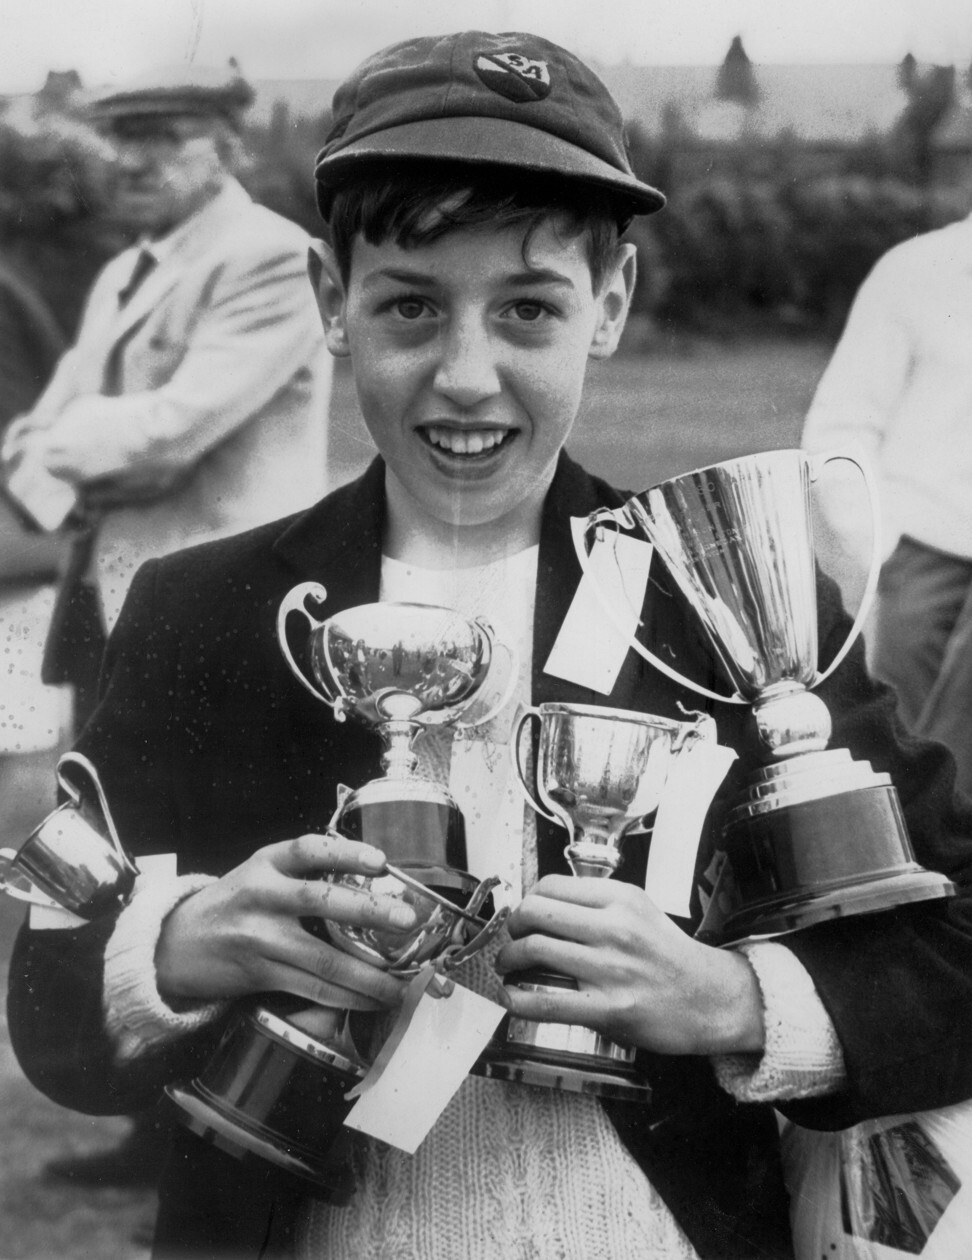 Lindesay as a child with trophies won on a school sport’s day, in 1967. Photo: courtesy of William Lindesay